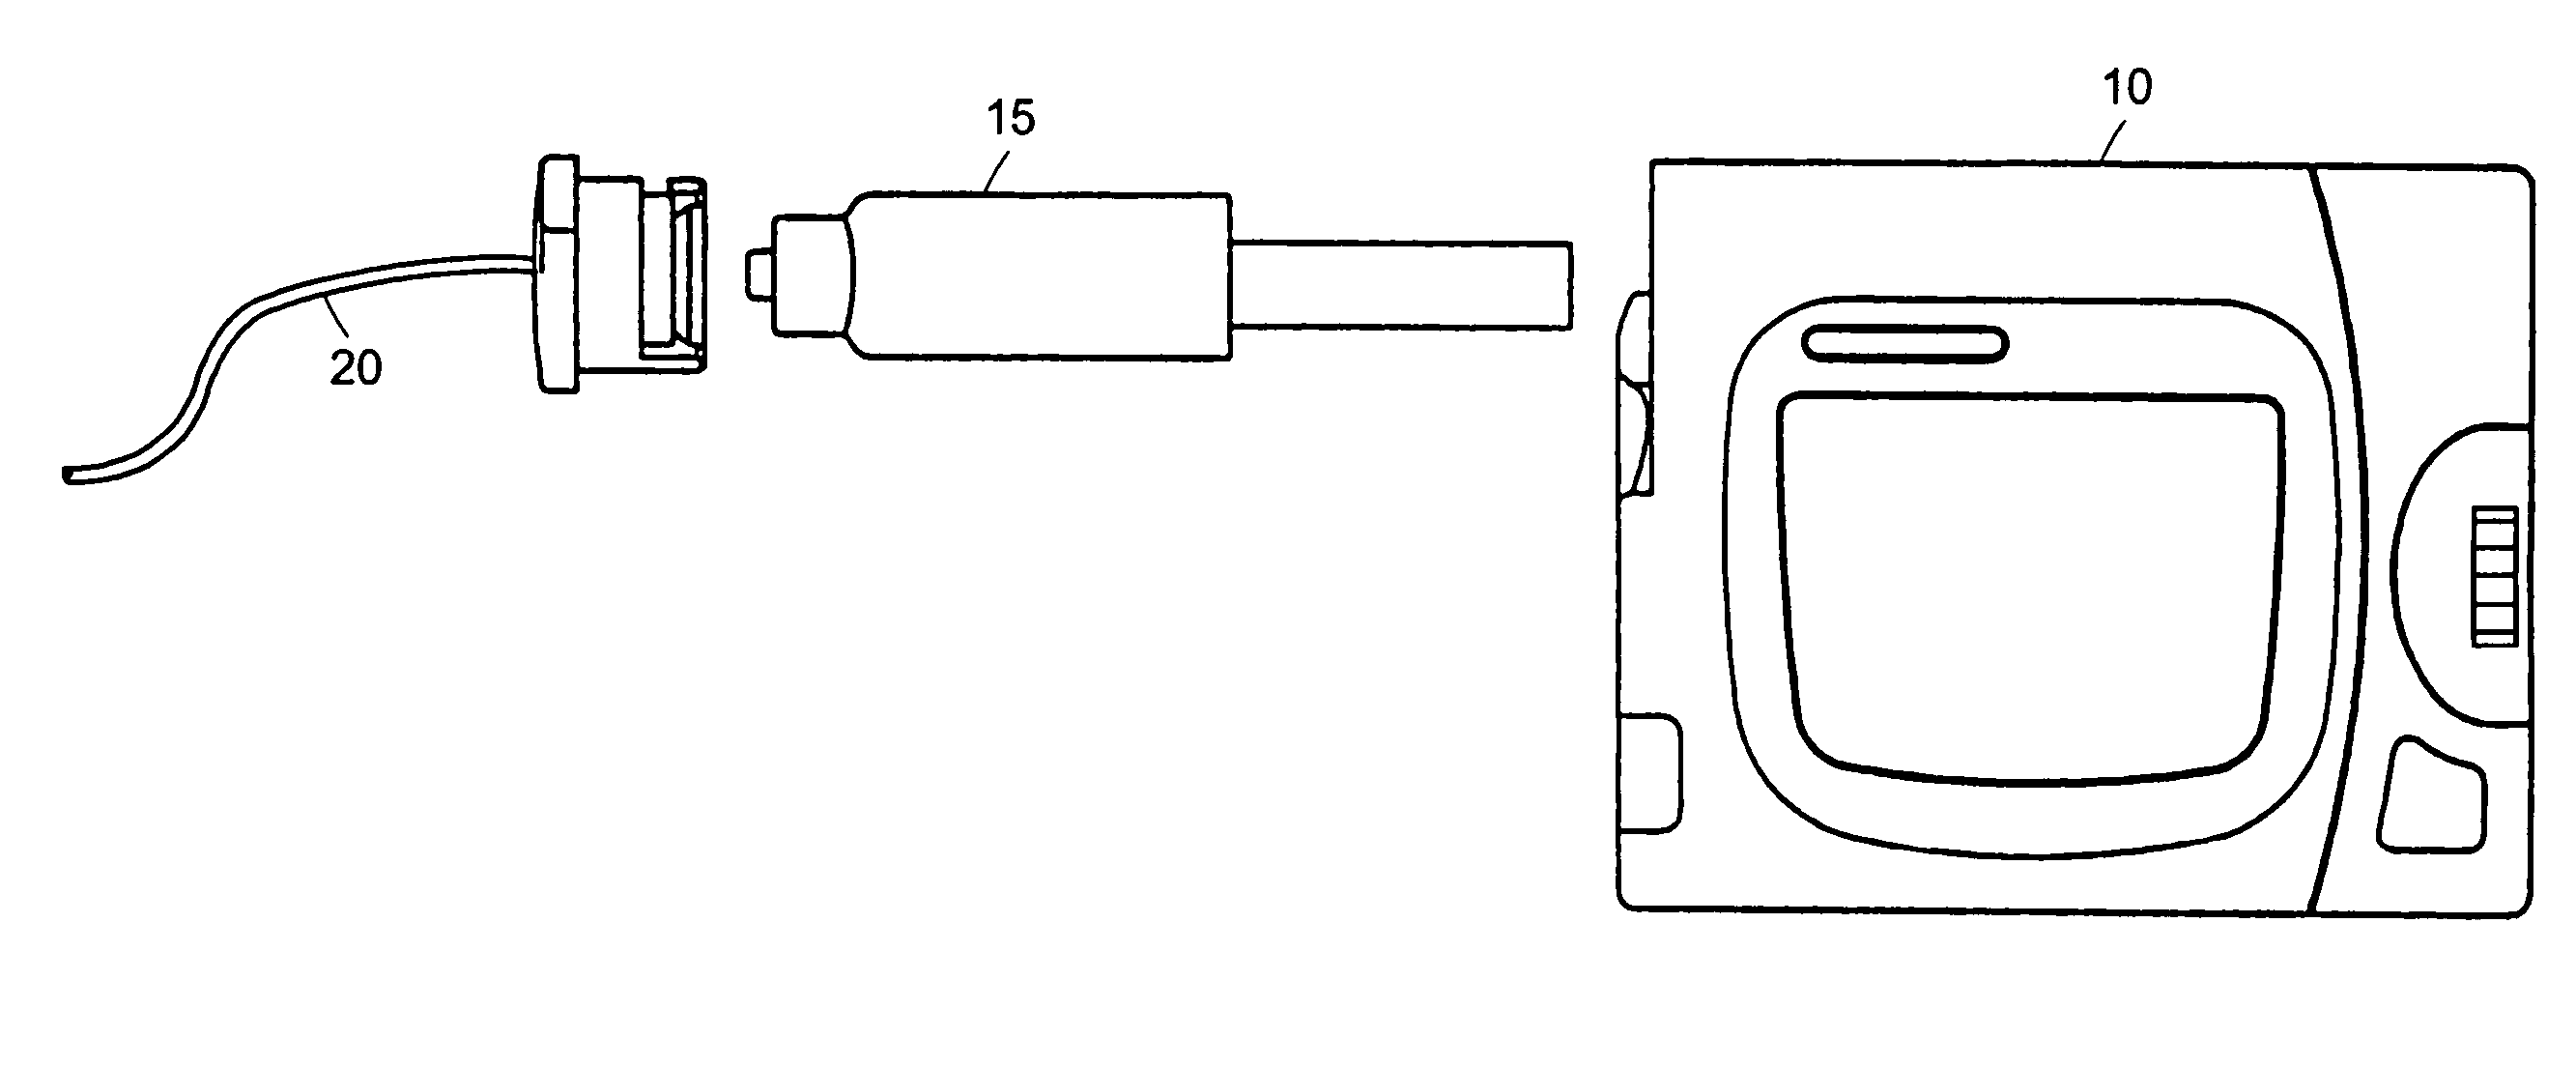 Loading mechanism for infusion pump